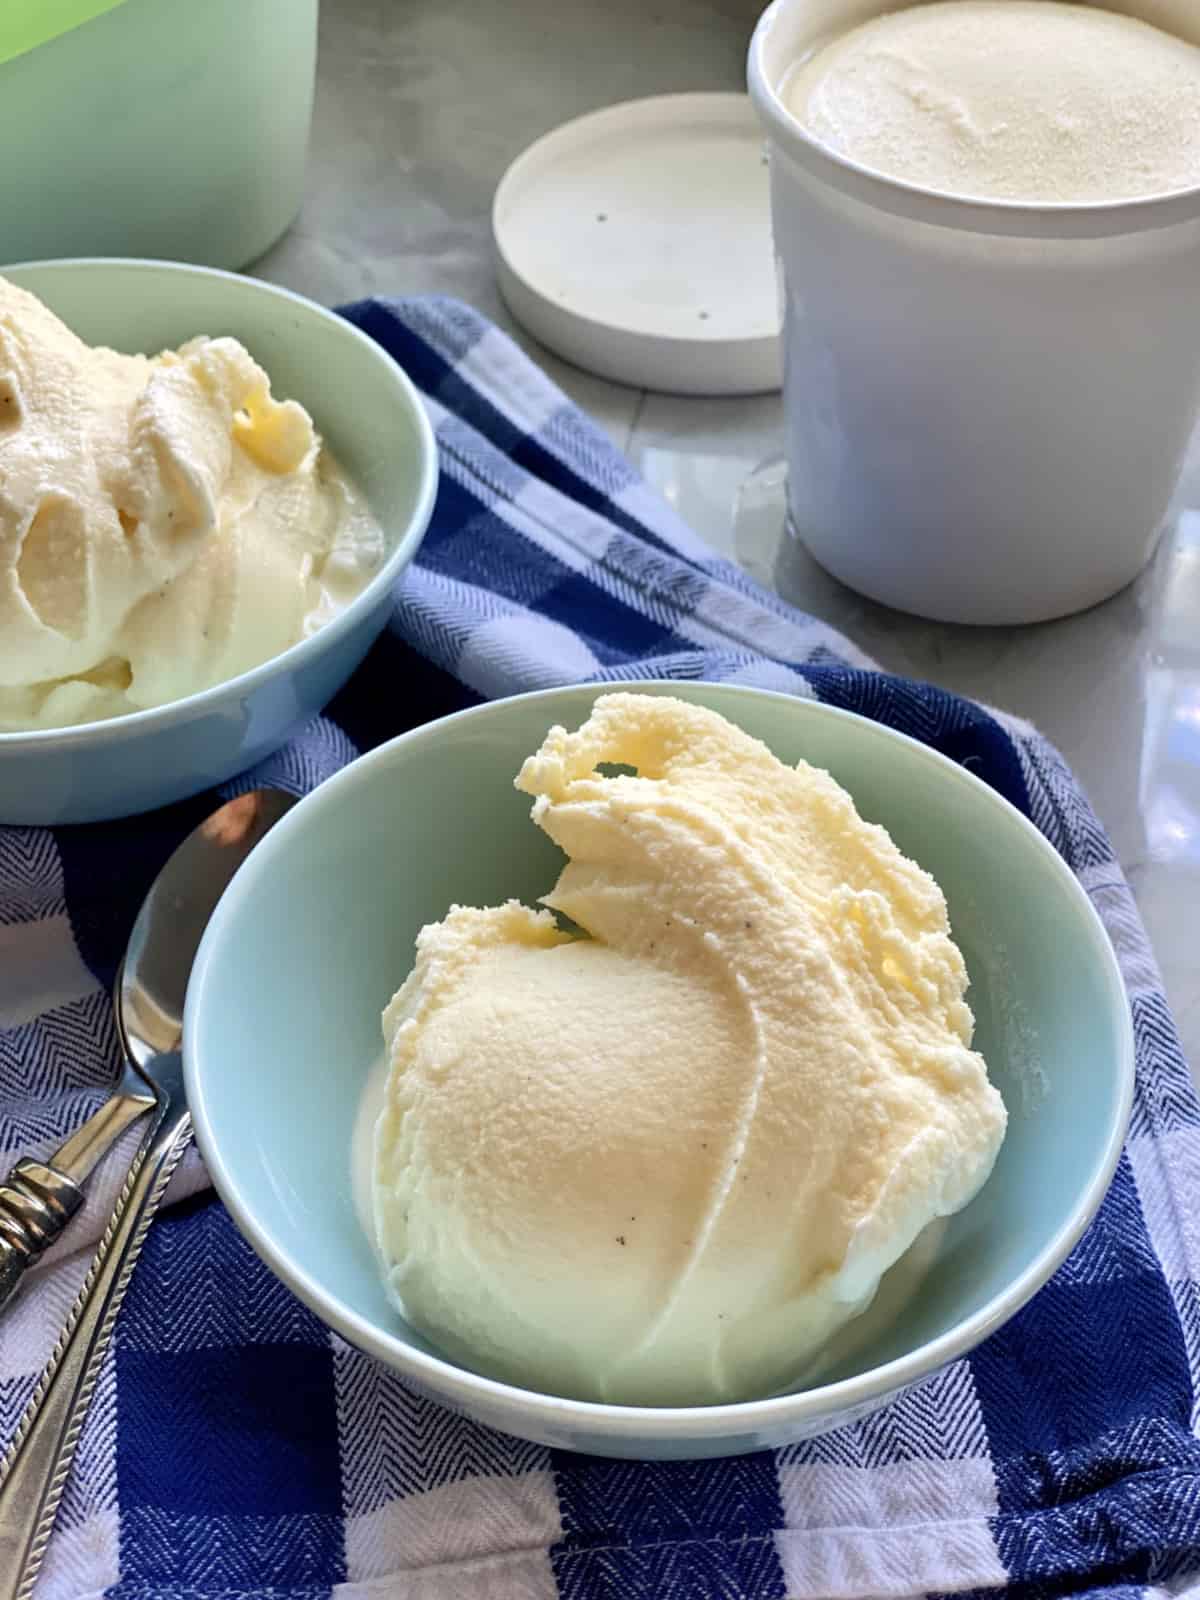 Blue bowl filled with vanilla ice cream on a blue and white plaid cloth.